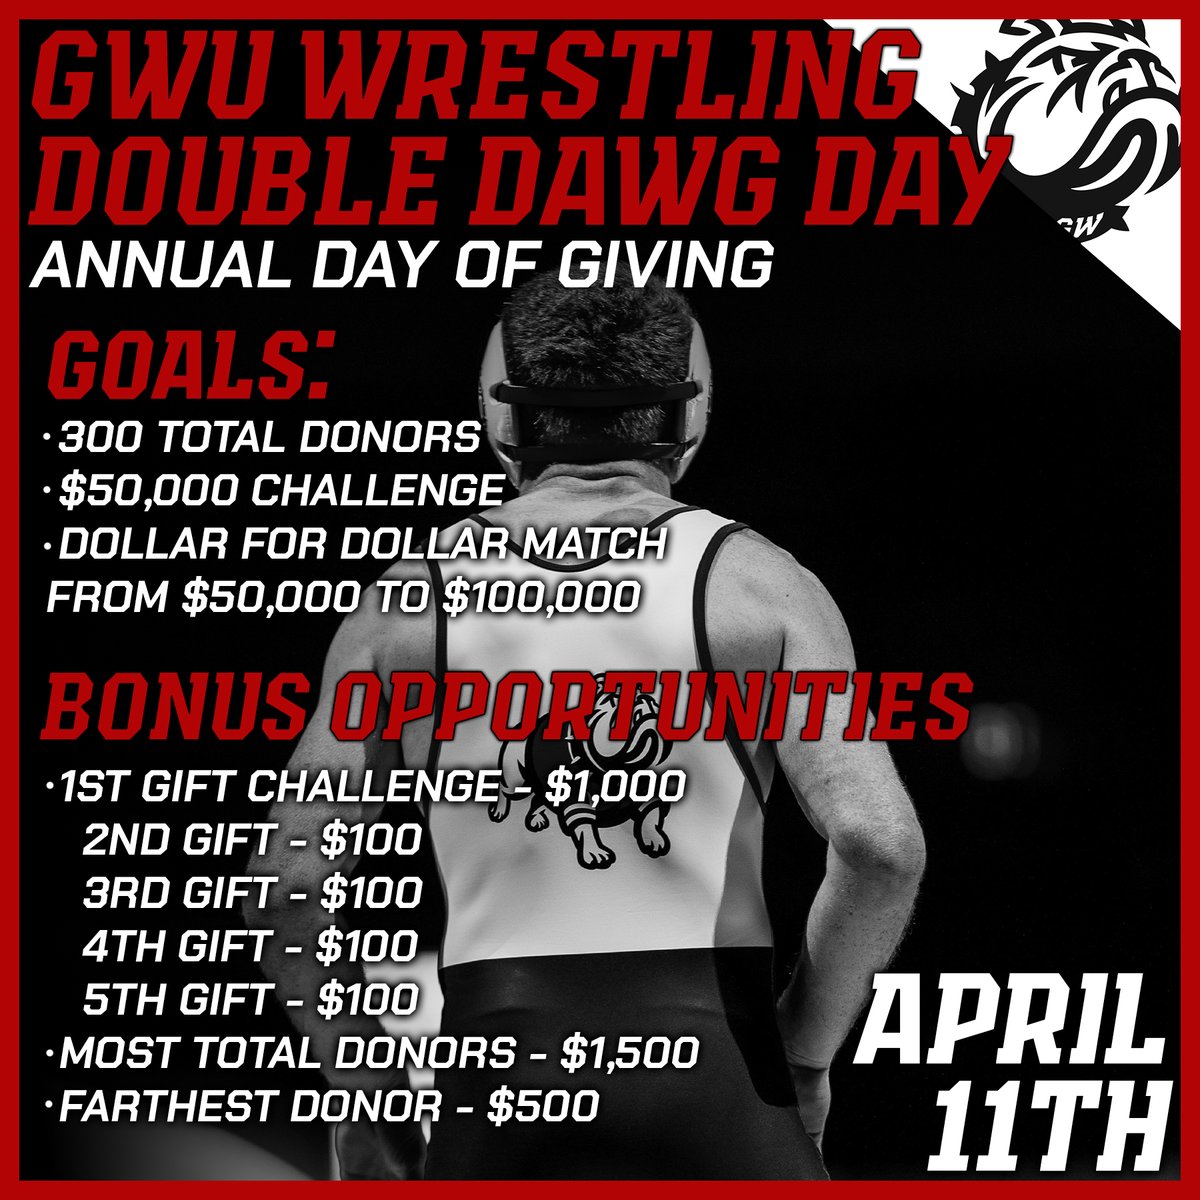 Just a little more than 5 hours from the kickoff of this year's Double Dawg Day. Huge opportunity to impact and change our program tomorrow. The link below goes live to our page at midnight. Check out the bonus opportunities!!! Lets #worklikeadawg givecampus.com/schools/Gardne…